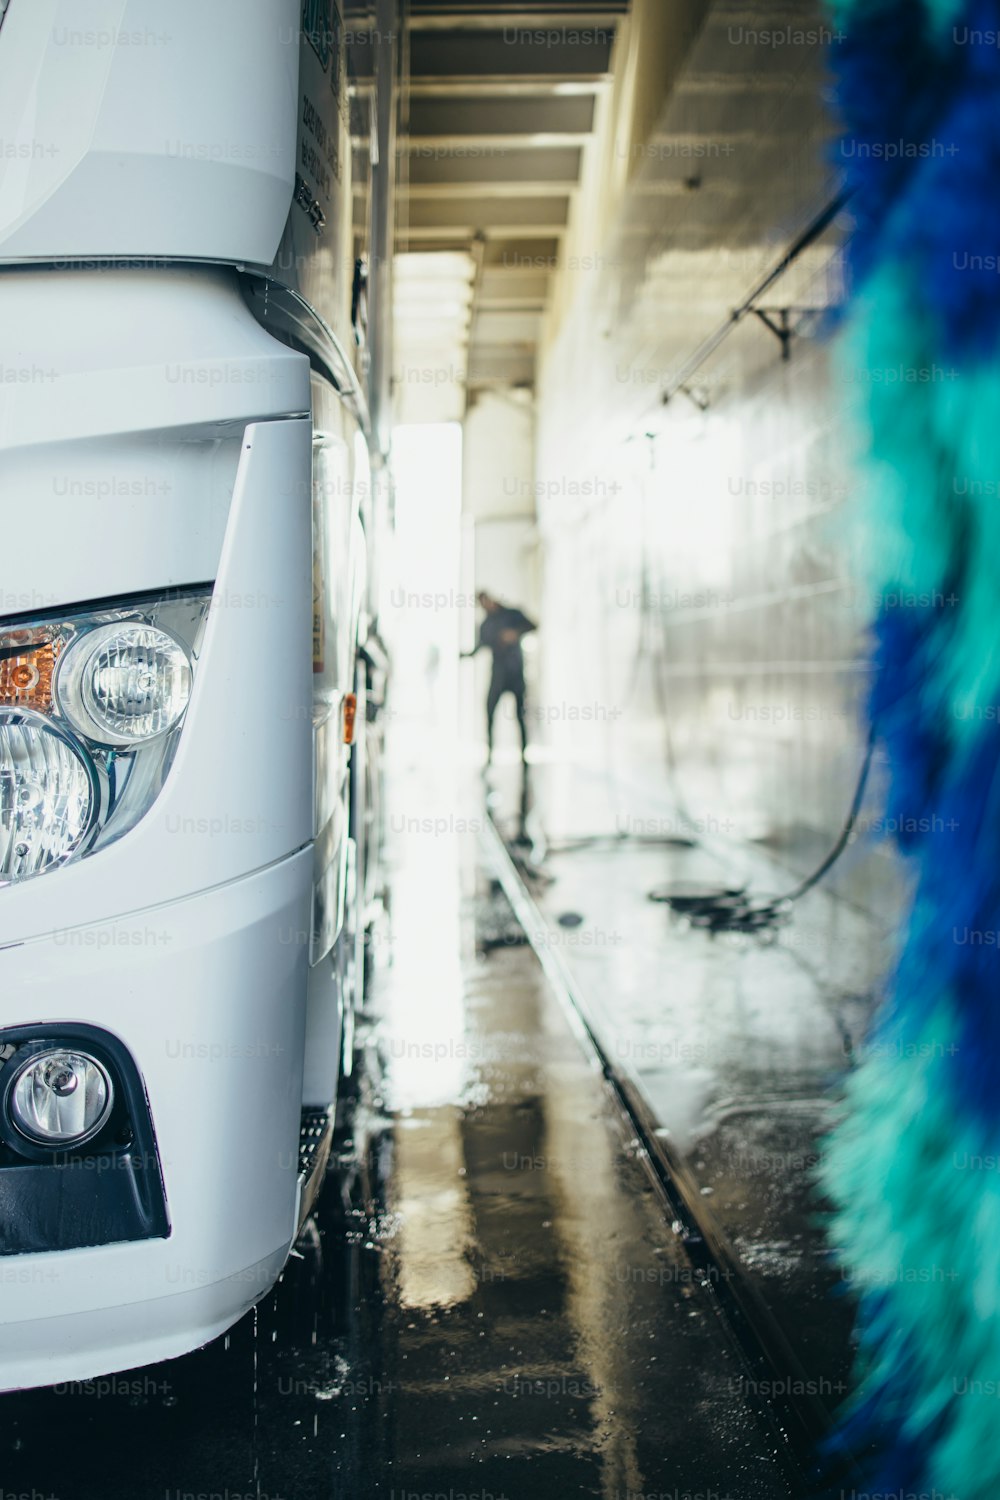 Big truck washing and cleaning at automatic car wash service or station. Transportation concept.